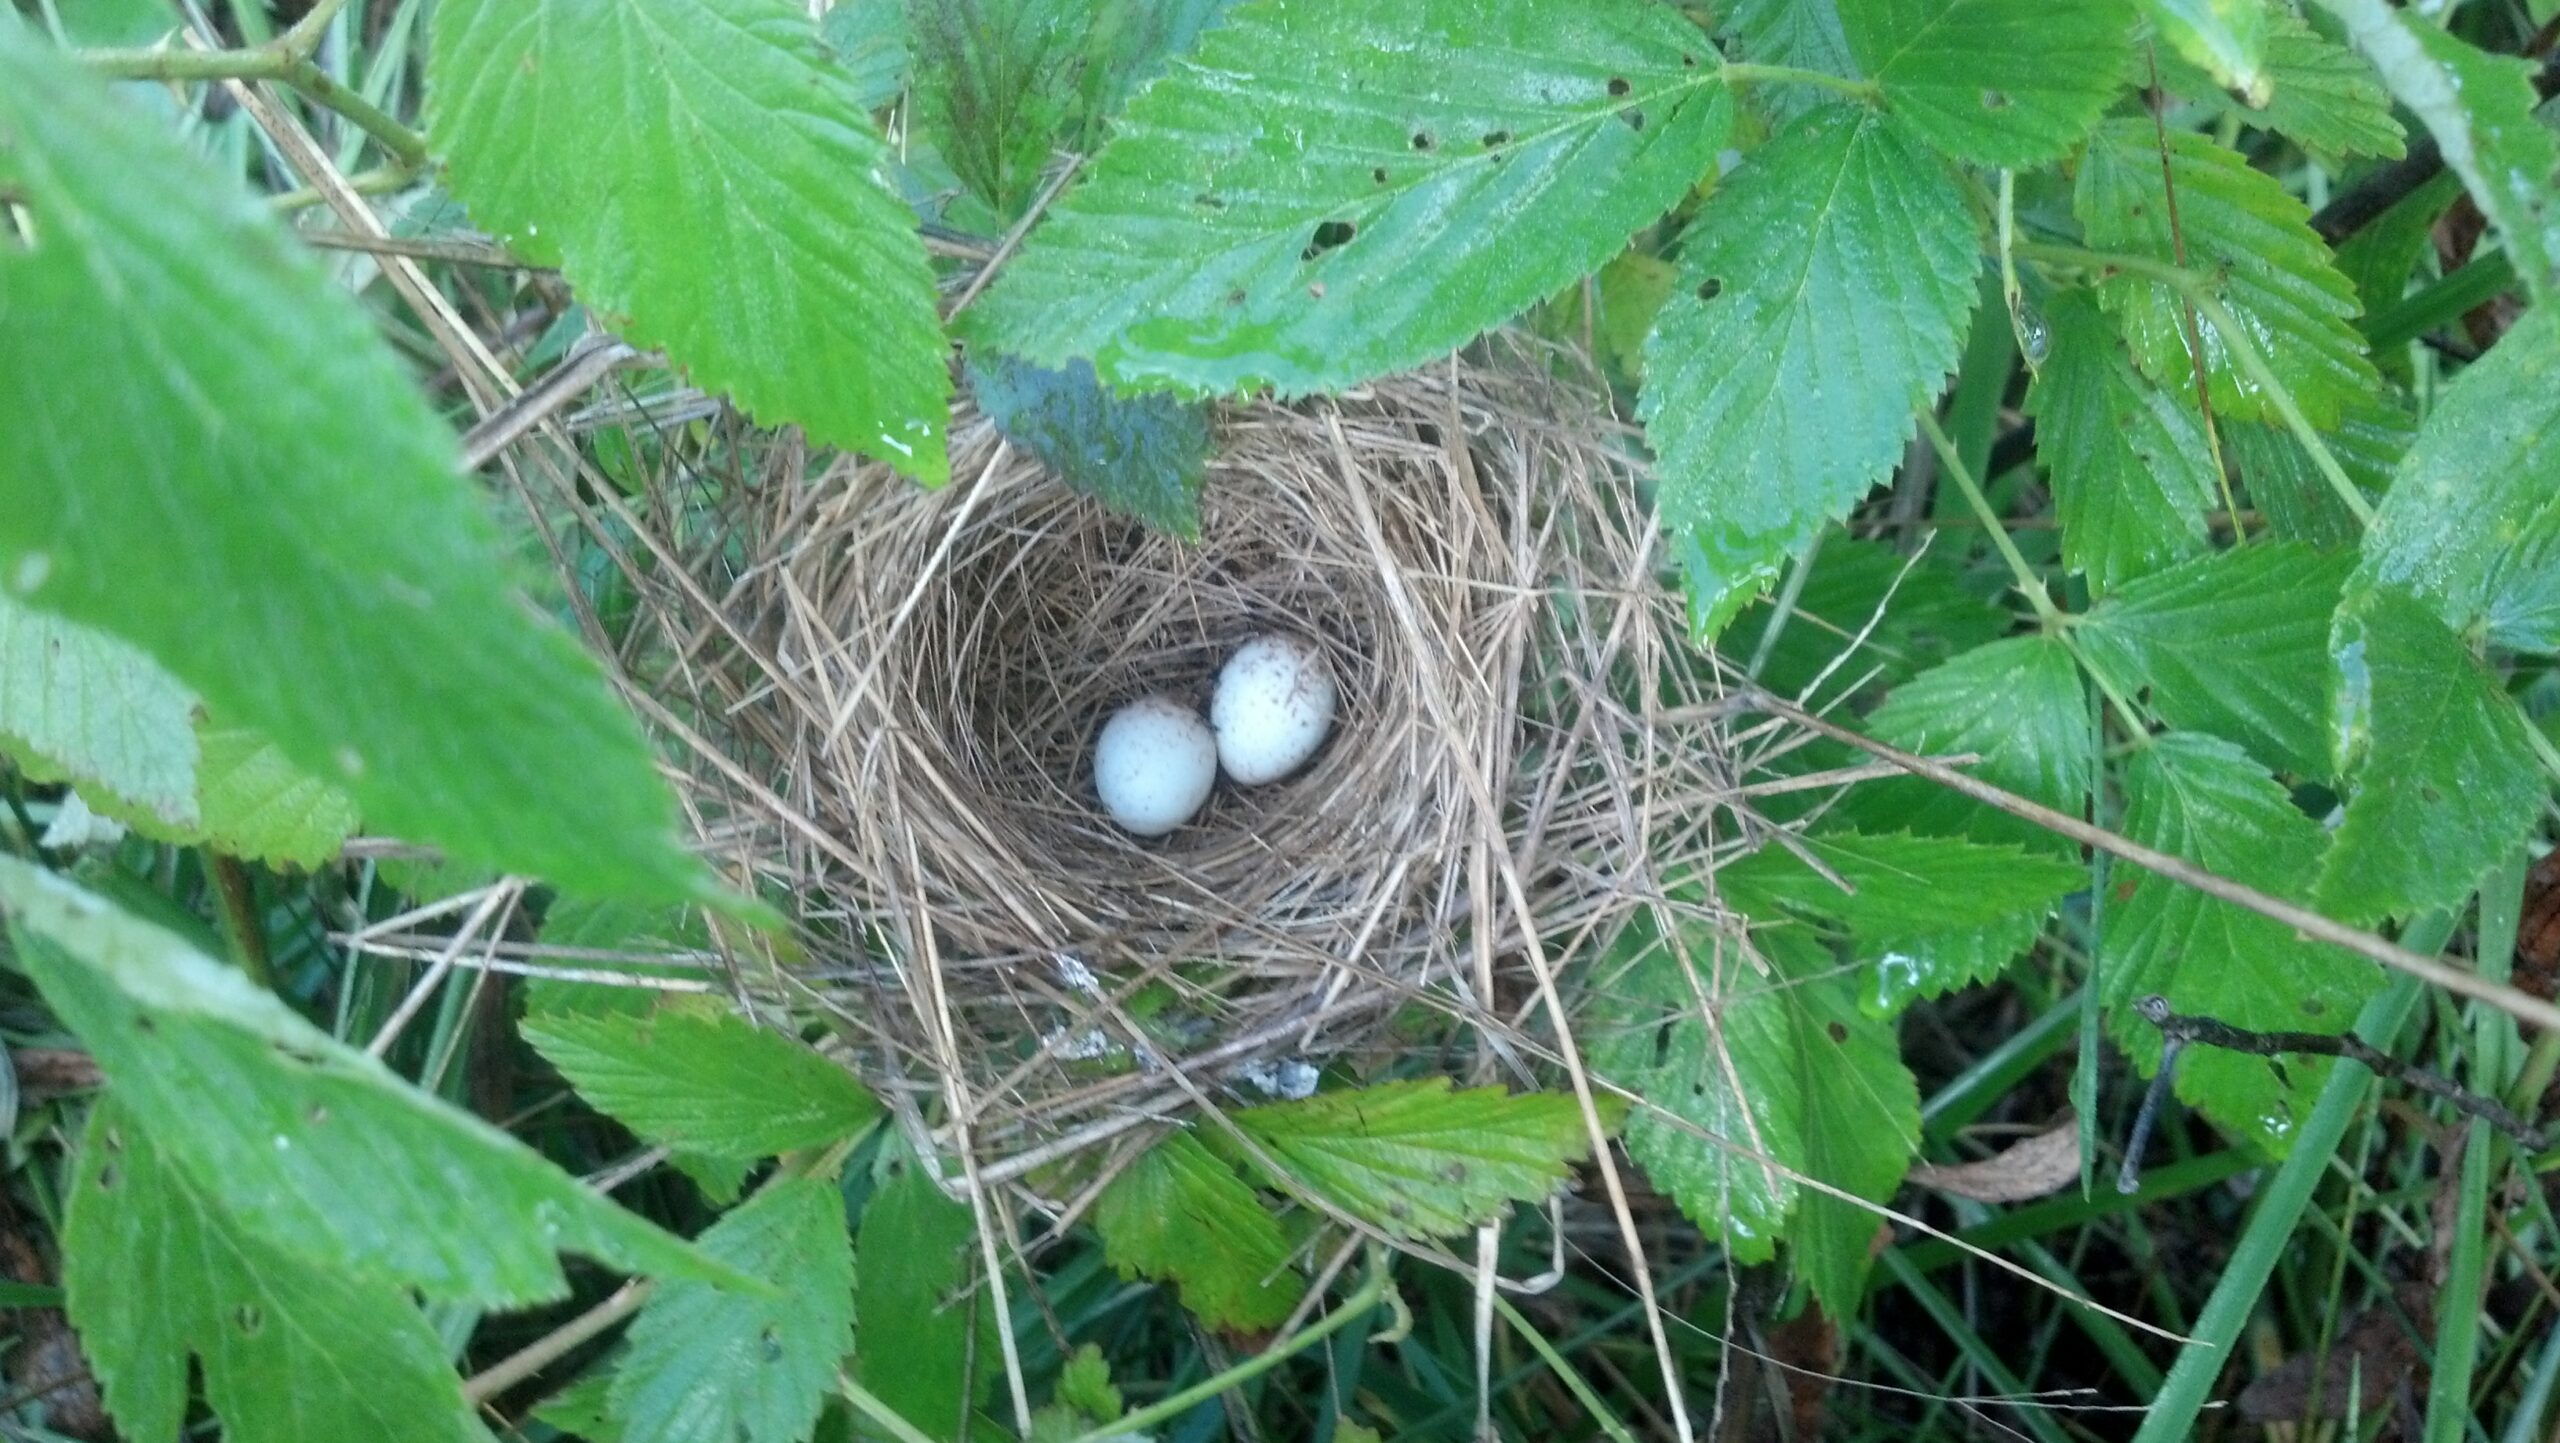 Surrounded by green briar leaves and grass, a small bird nest holds two eggs. The eggs are pale blue to white with light brown speckles.